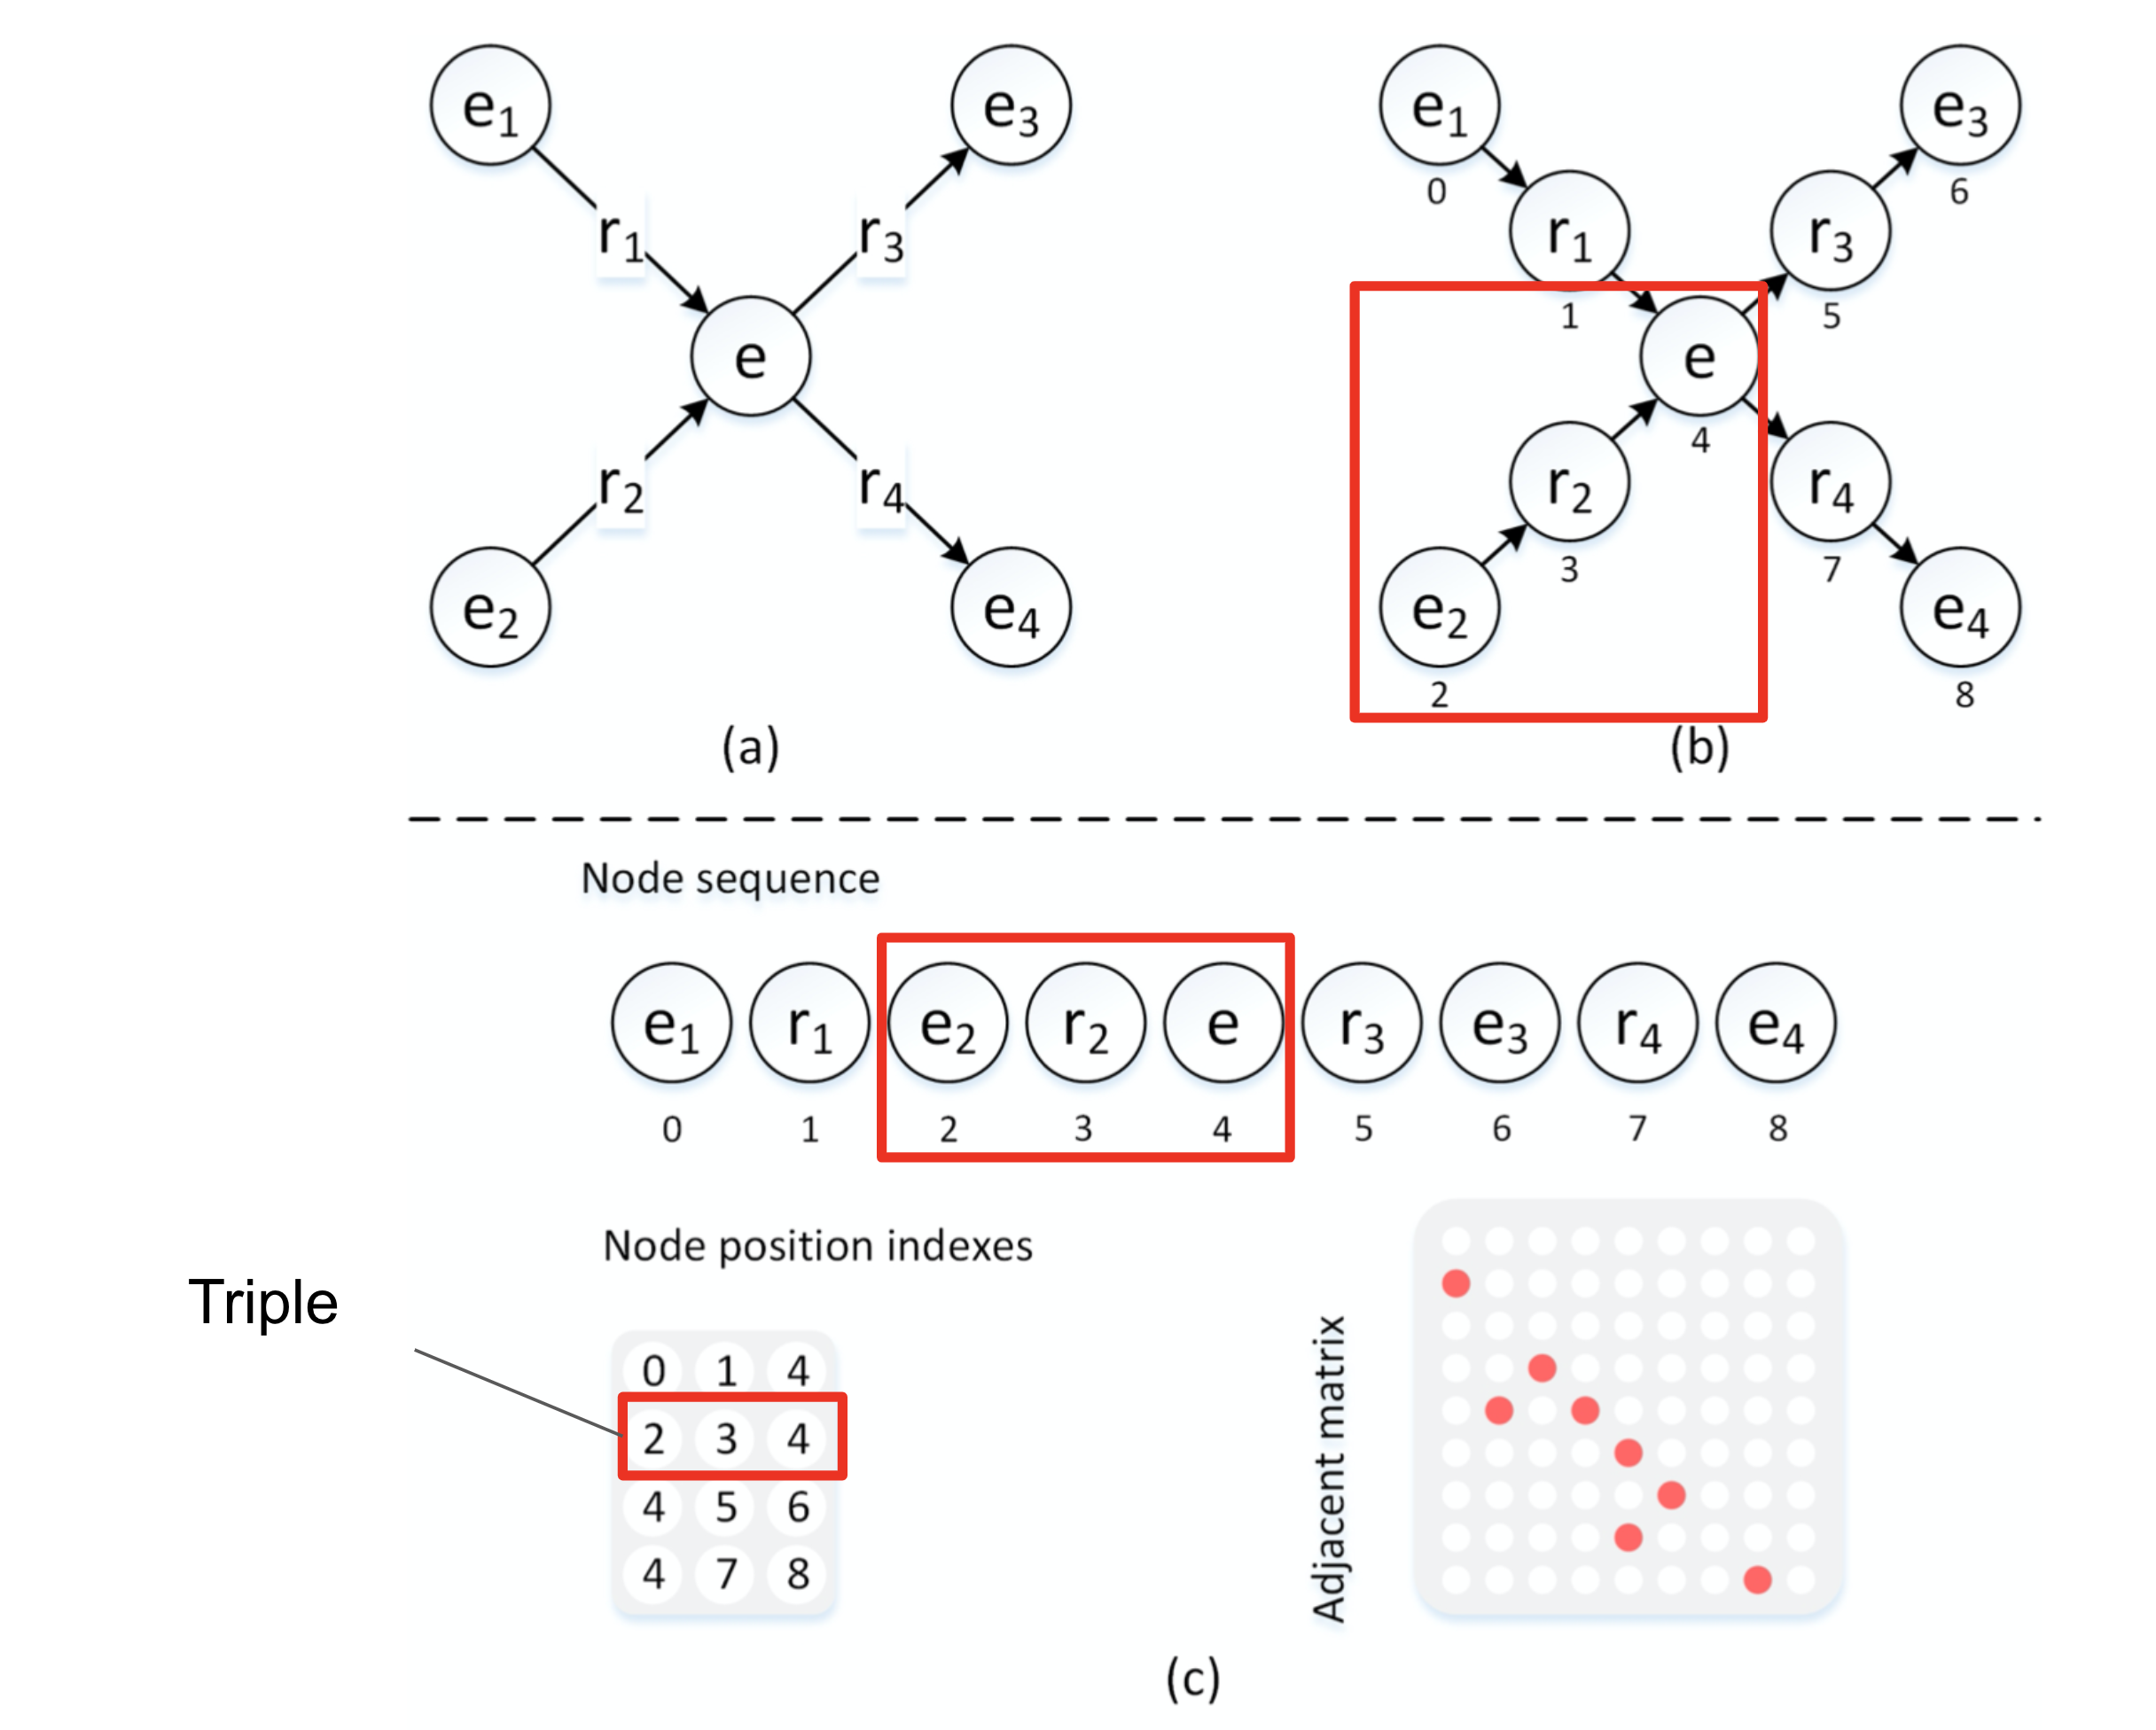 Figure 2 from the paper describing how subgraphs are represented as node sequences